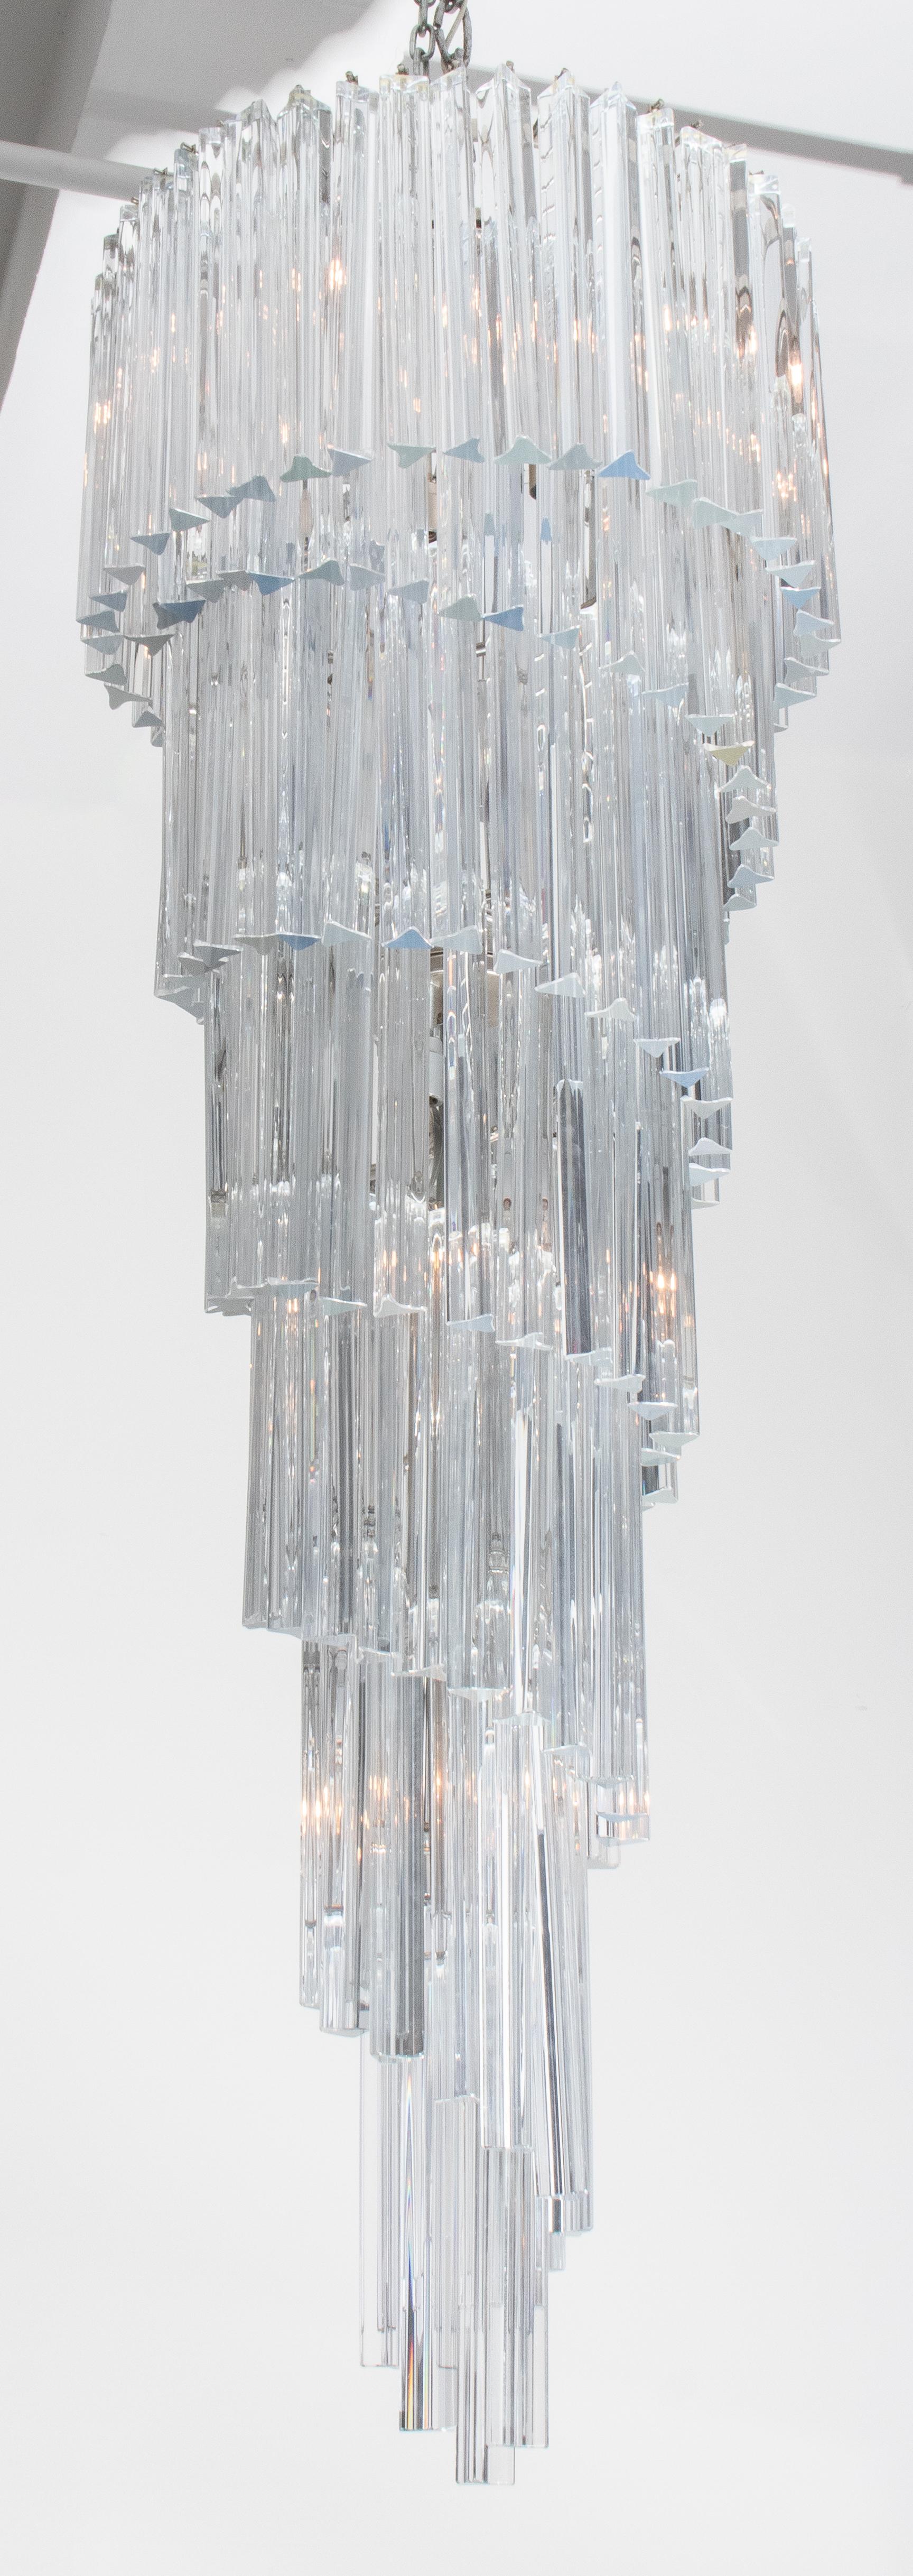 Venini Triedri Series Glass Cascading Spiral Chandelier. Provenance: From a New York City collection.

Dealer: S138XX